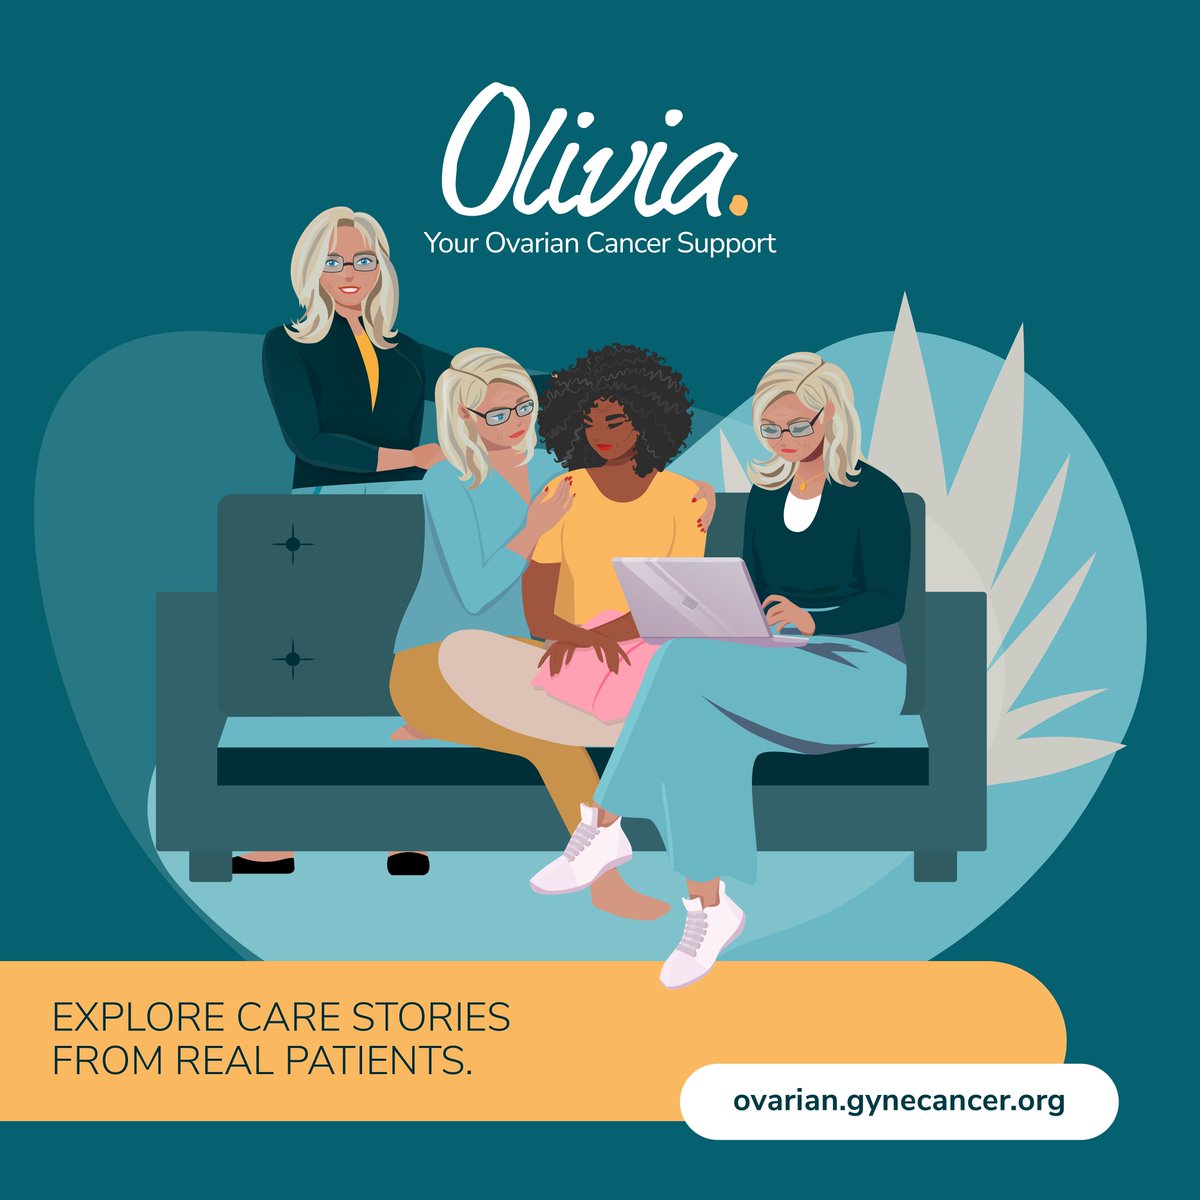 Living with cancer may change how you relate to life, including your friends, family, work or even your own sense of self. 💜 Fortunately, you are not facing ovarian cancer alone. Olivia offers care stories from real patients, like Rosanna in the UK. 👉 ovarian.gynecancer.org